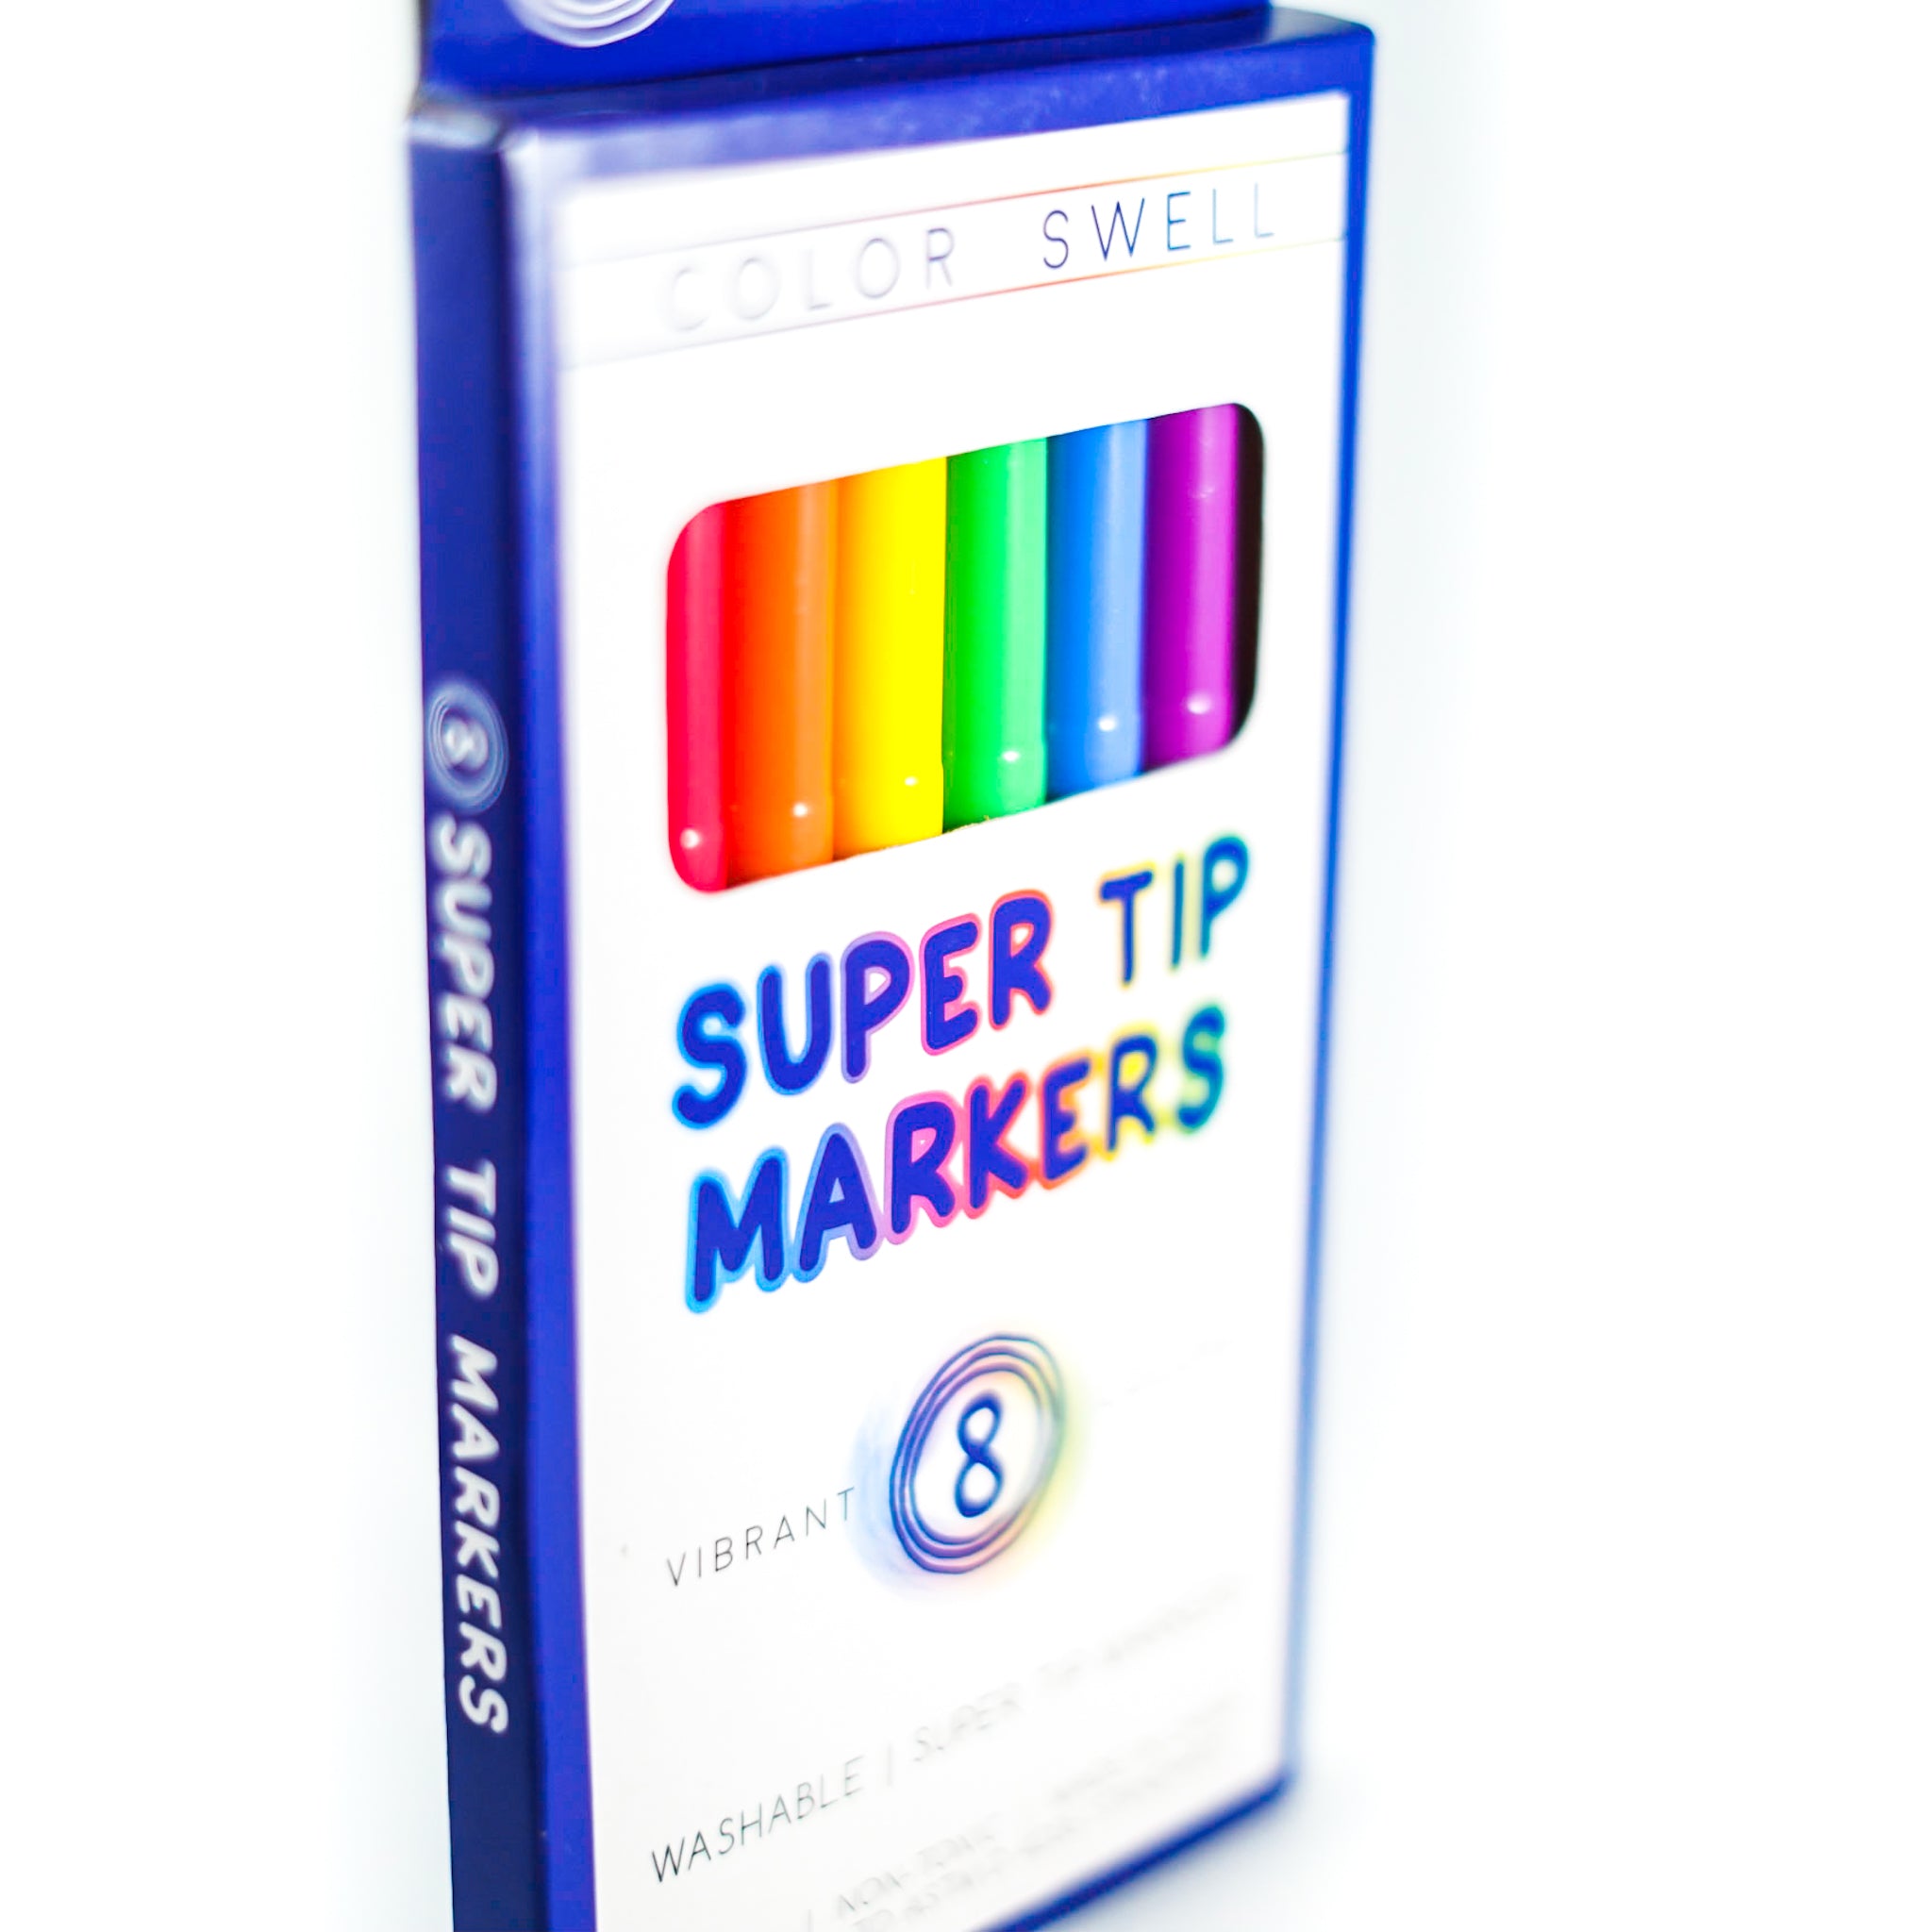 Washable Super Tips Markers, 50 Count